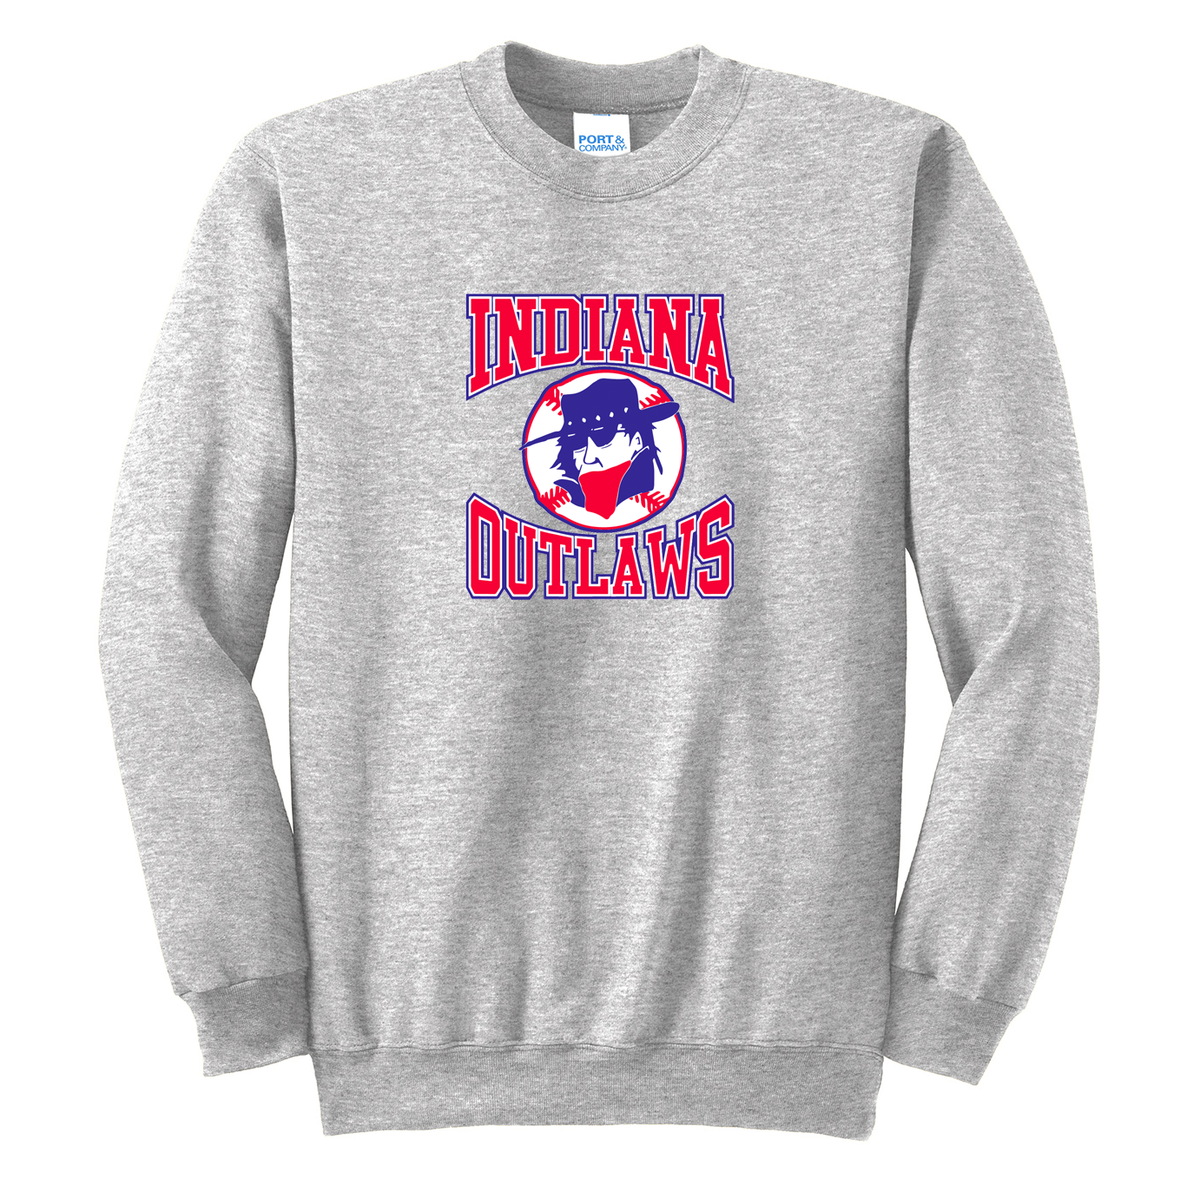 Southern Indiana Outlaws Baseball Crew Neck Sweater